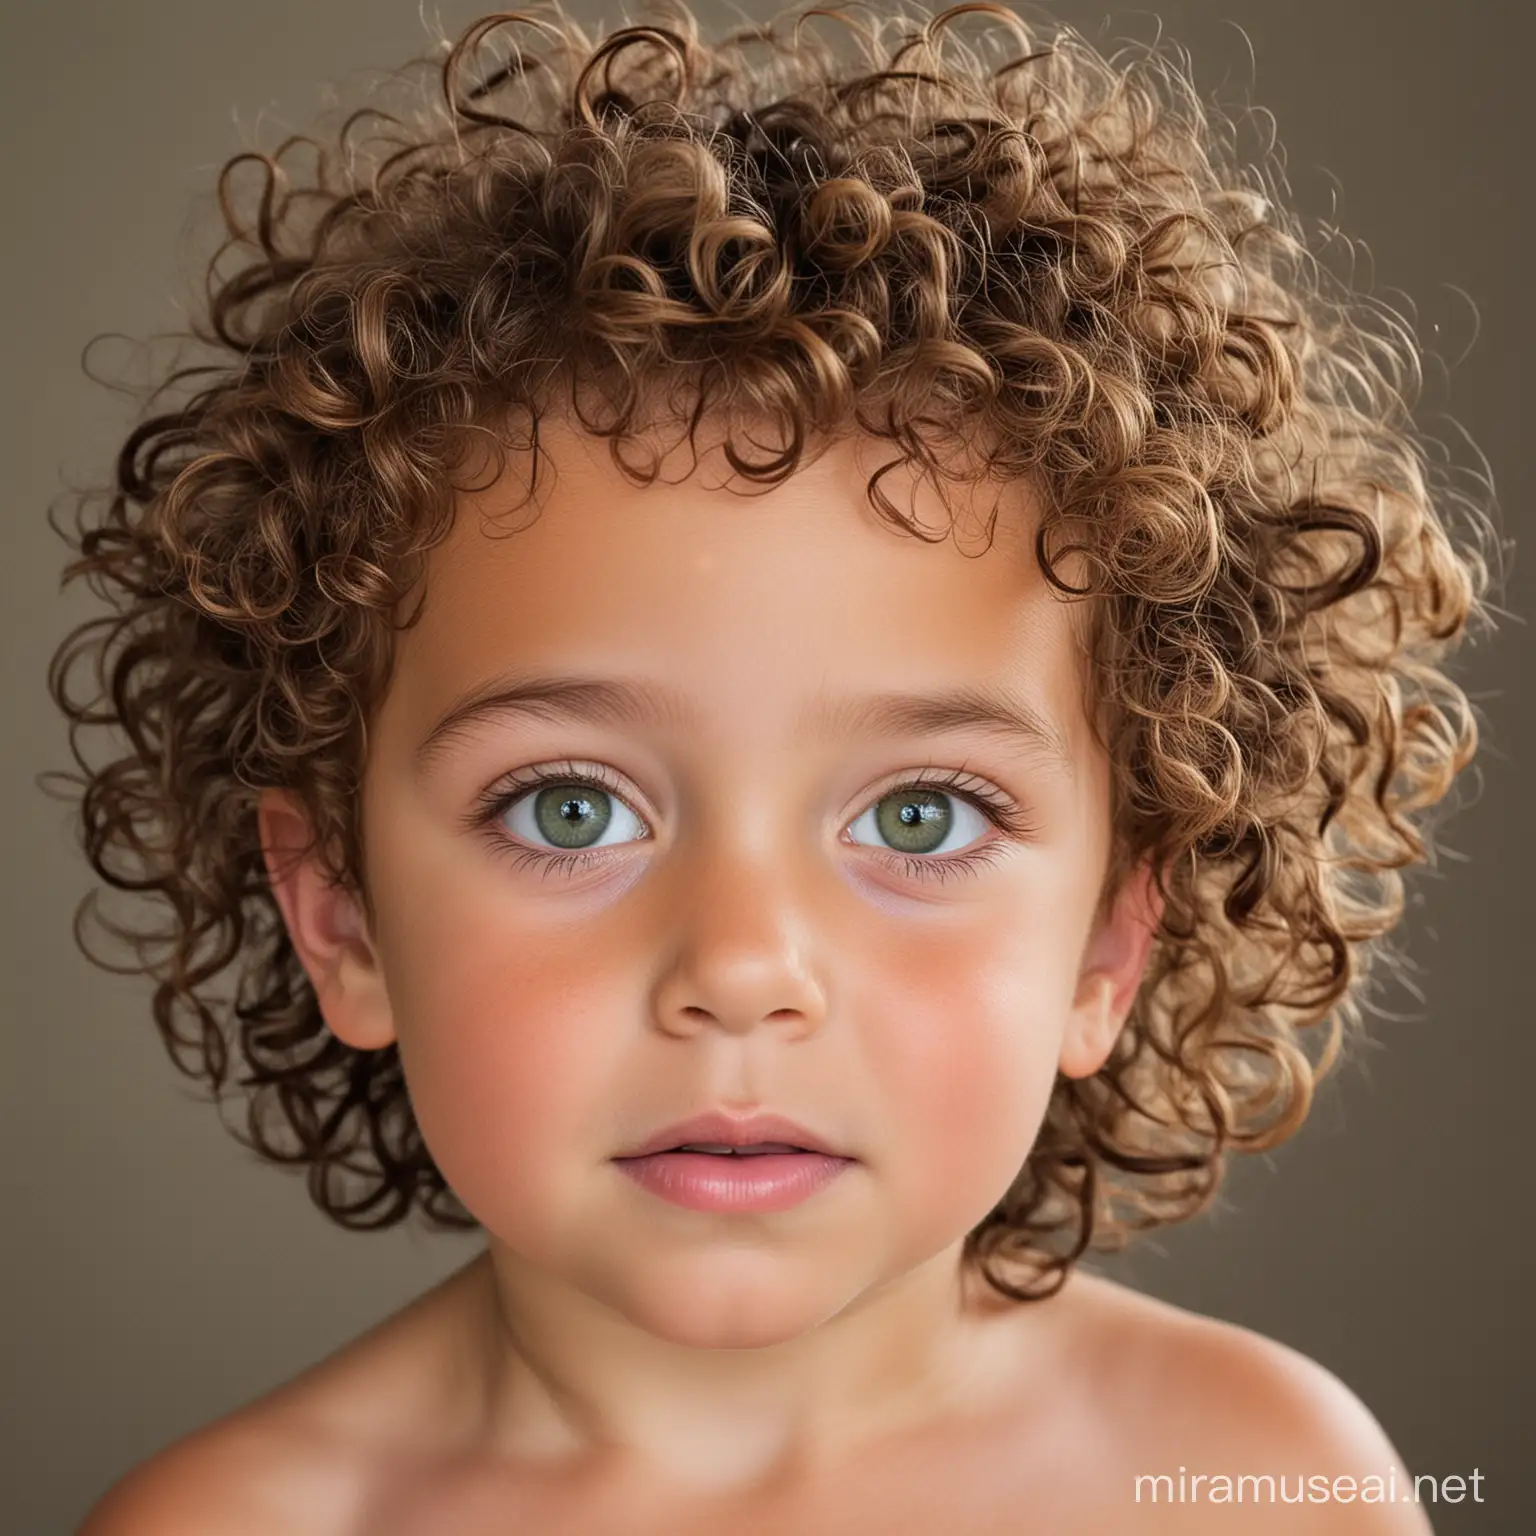 A 2 year old boy with green eyes curly hair and lightly tan skin